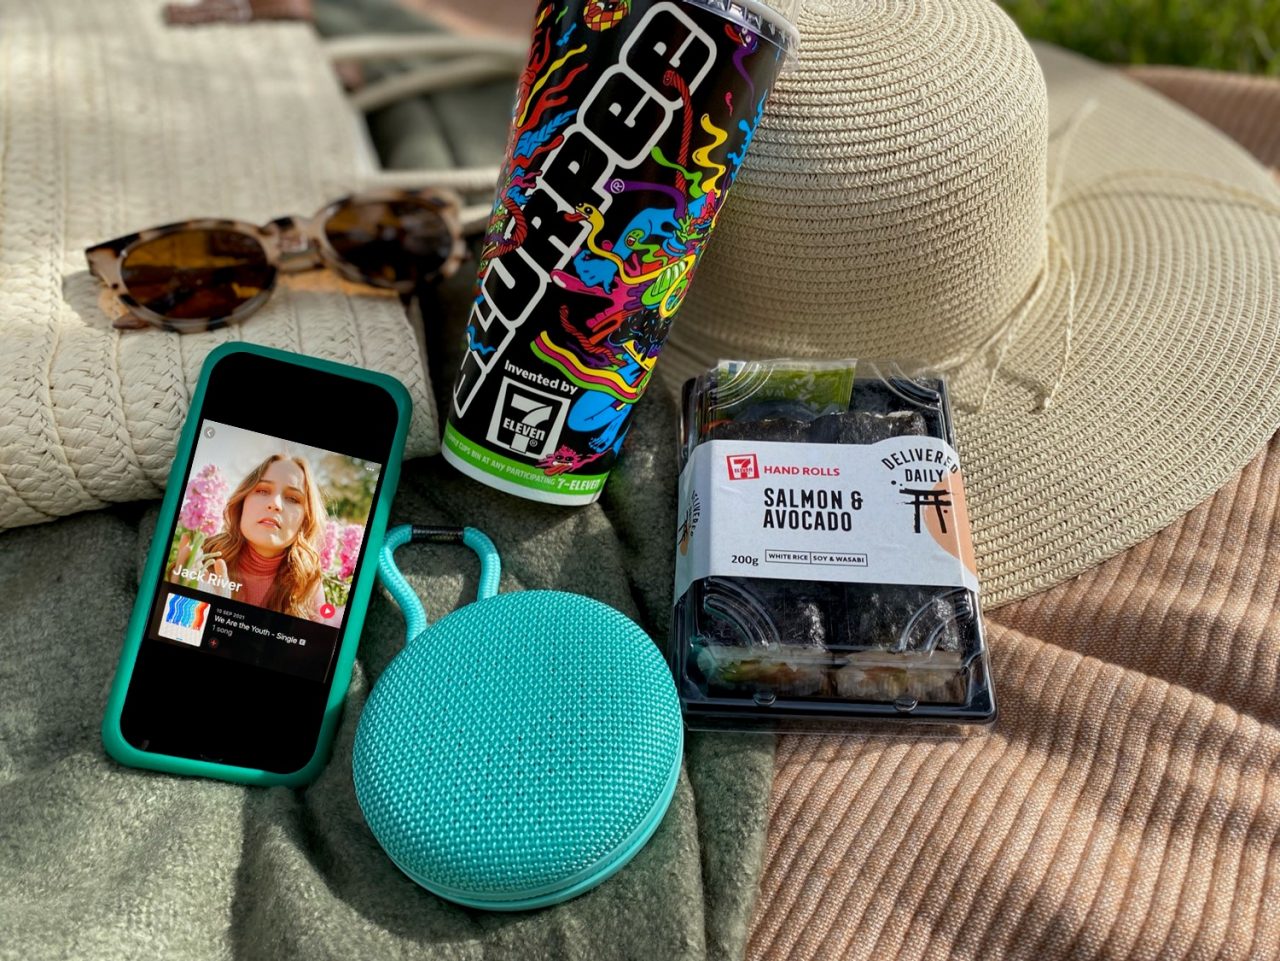 A picture of a picnic blanket with a summer hat, sunglasses, a Slurpee Cup, a pack of 7-Eleven sushi, a portable music speaker and an iphone playing music. Artist Jack River's single is pictured in the screen.